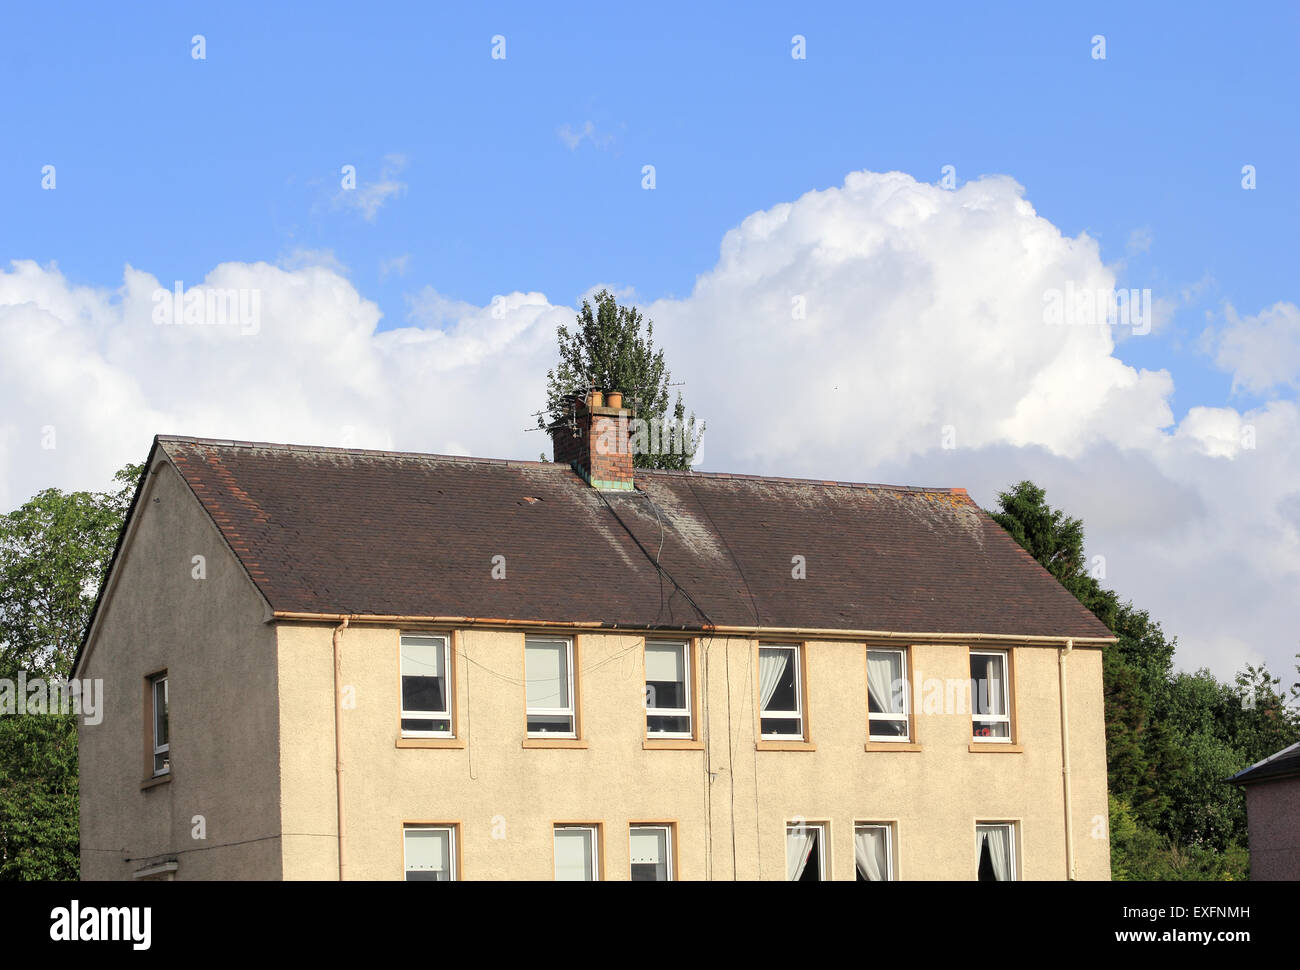 Council flats in Airdrie, North Lanarkshire, Scotland Stock Photo